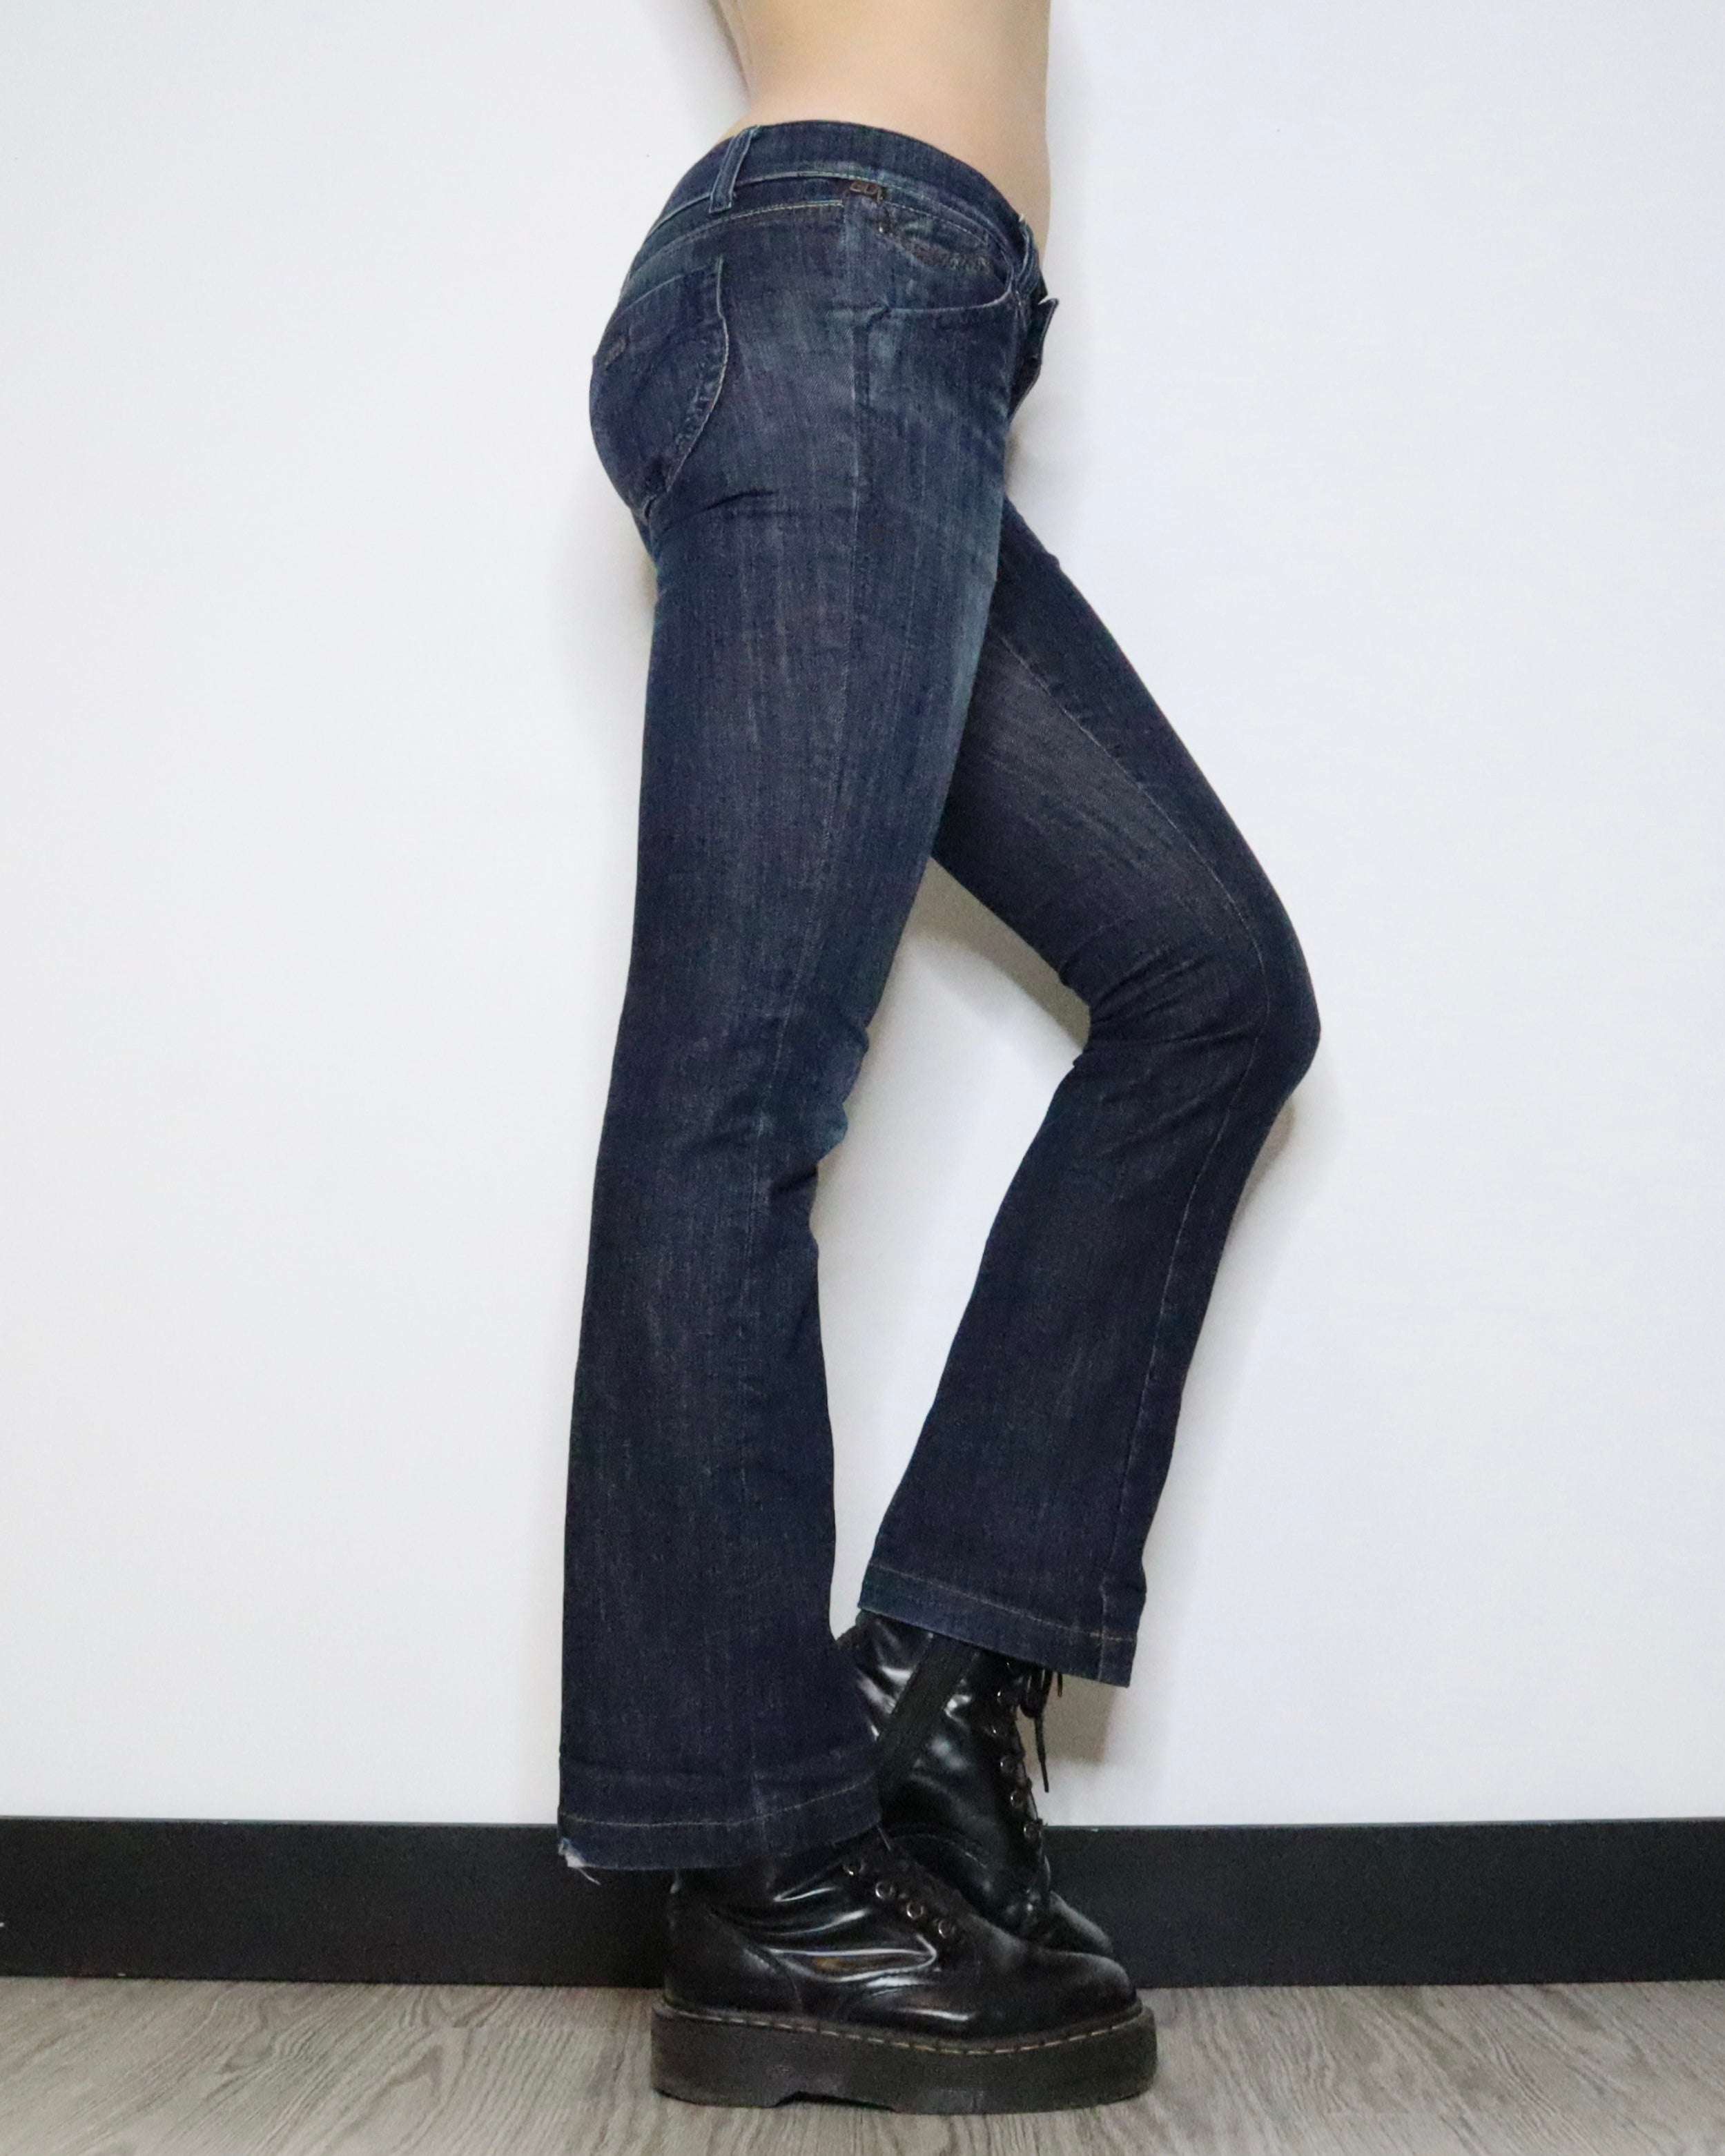 Clip sommerfugl sund fornuft Imperialisme Miss Sixty Bootcut Jeans (Small) - Imber Vintage